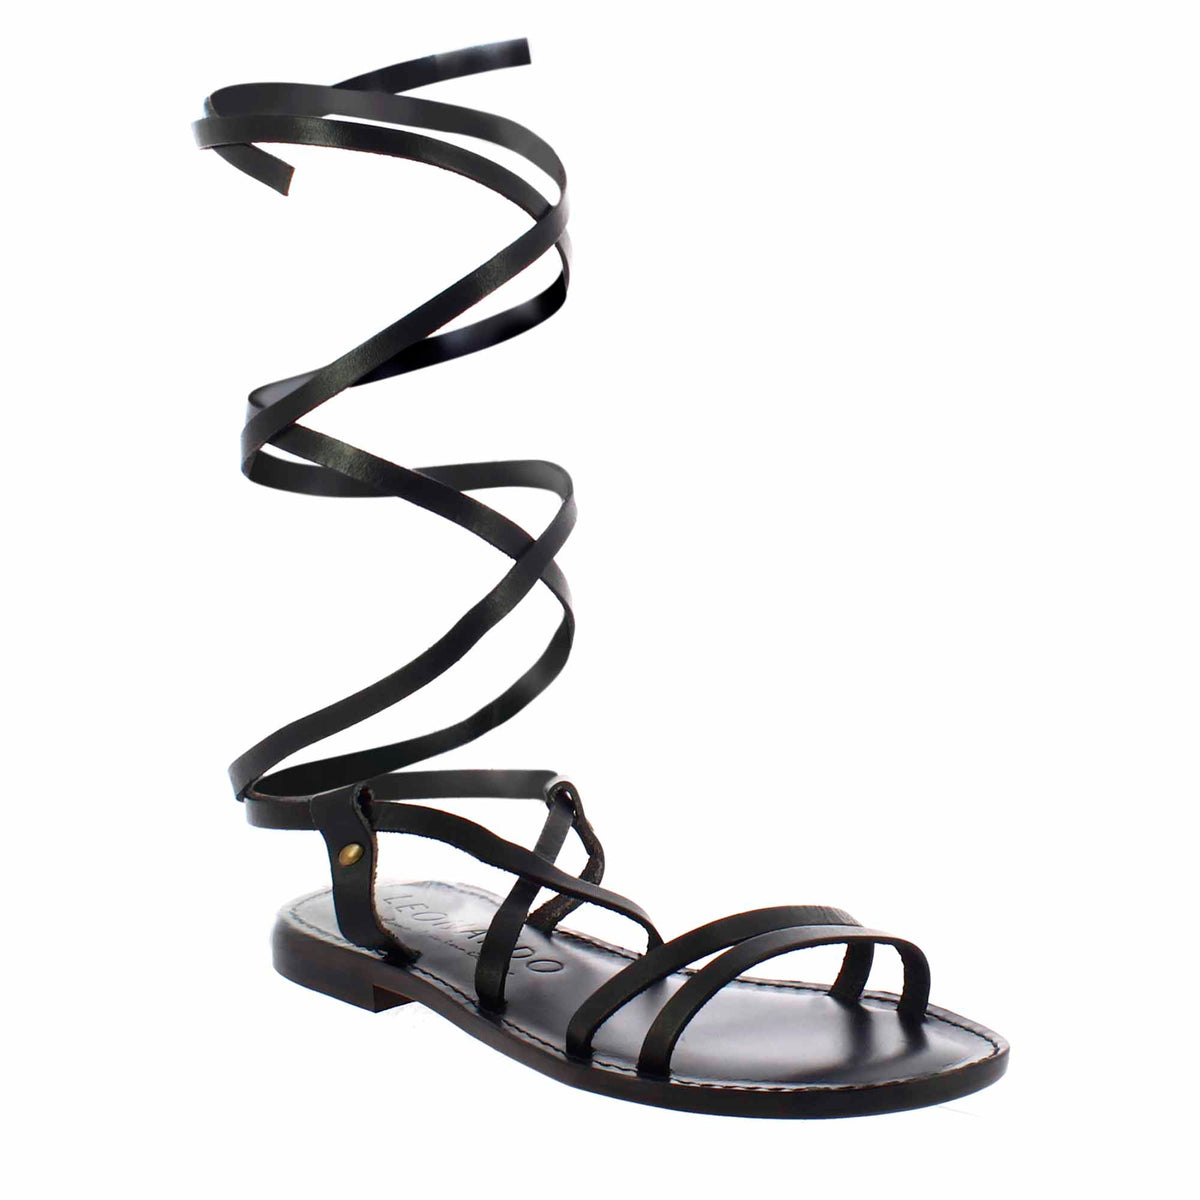 Ancient Roman style Lumina women's sandals in black leather 